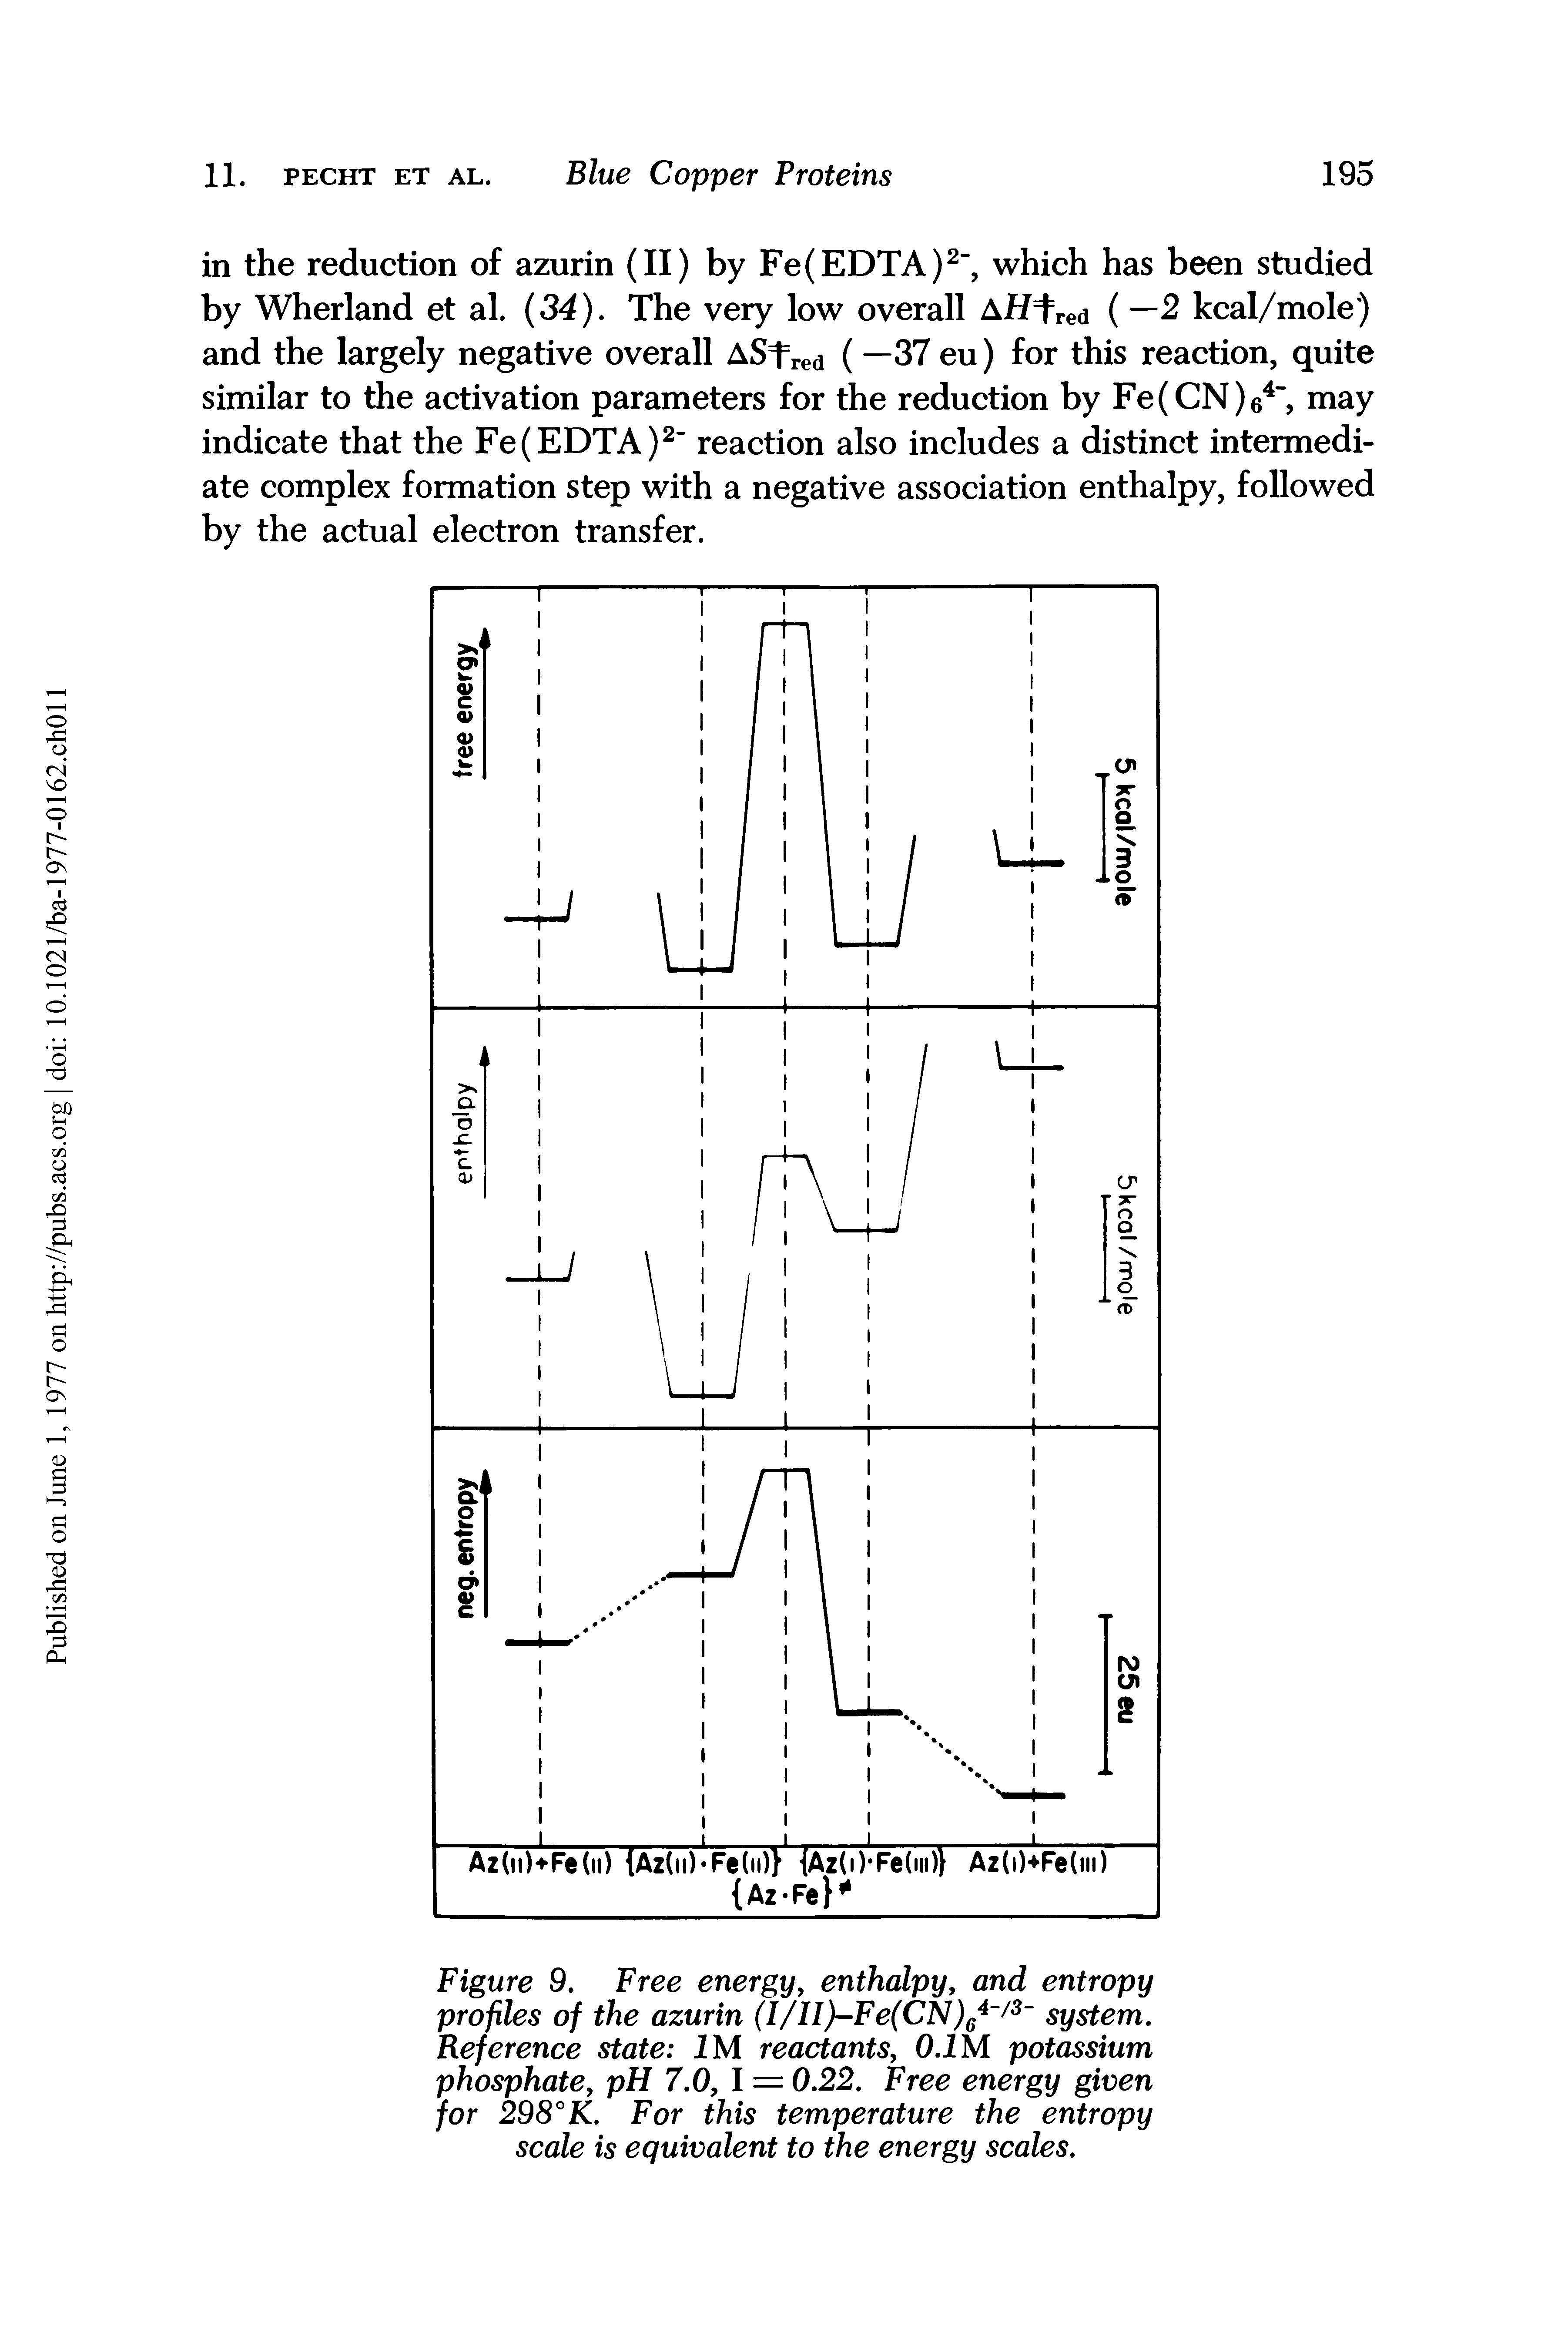 Figure 9. Free energy, enthalpy, and entropy profiles of the azurin (I/II)-Fe(CN)64 /3 system. Reference state 1M reactants, 0.1M potassium phosphate, pH 7.0, I = 0.22. Free energy given for 298°K. For this temperature the entropy scale is equivalent to the energy scales.